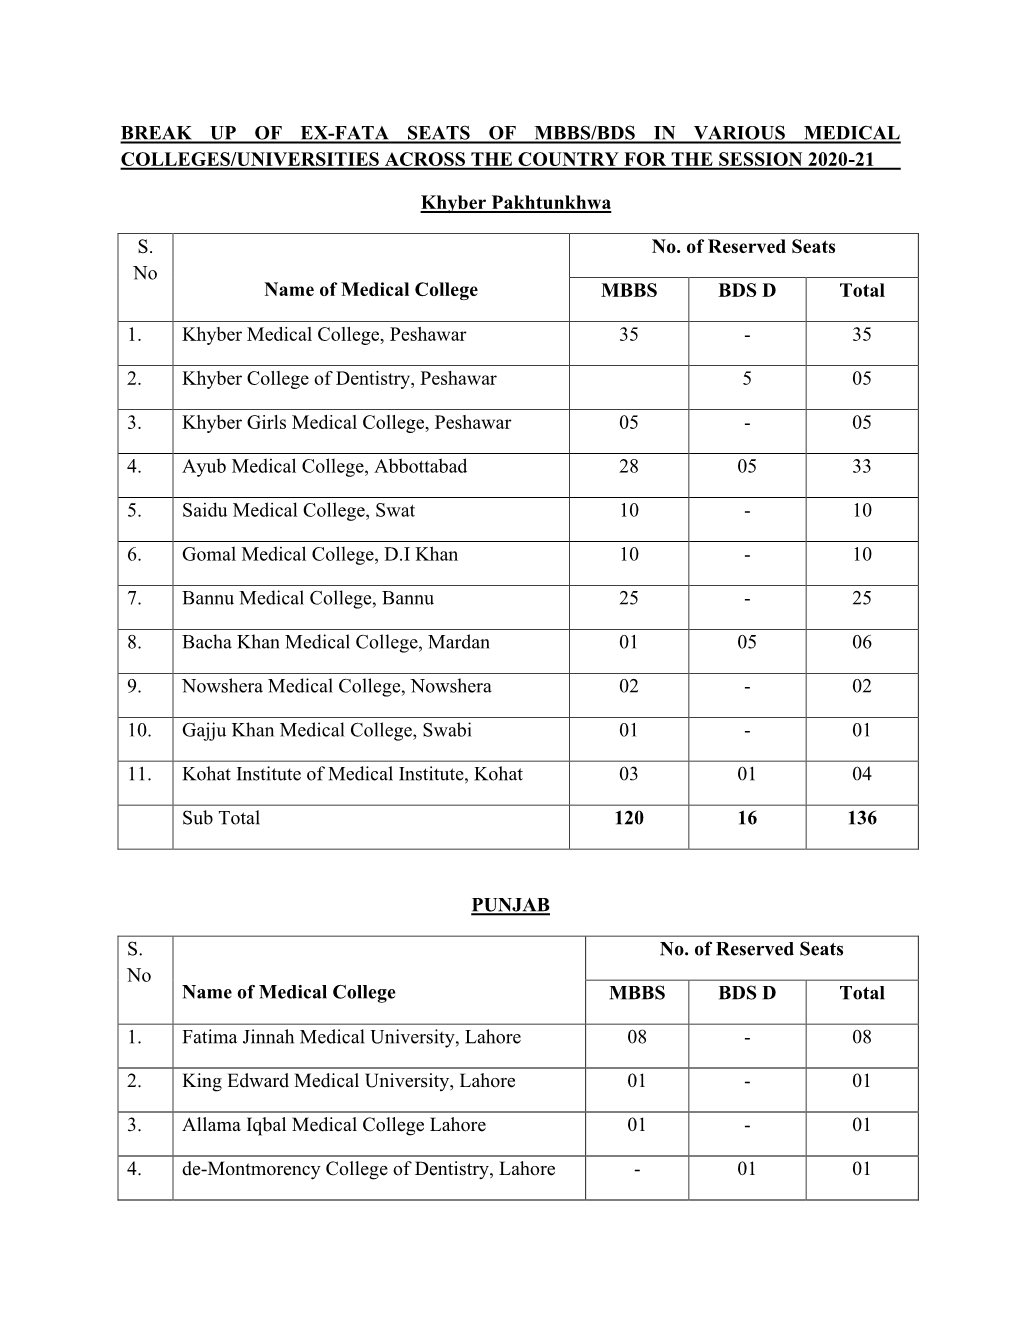 Break up of Ex-Fata Seats of Mbbs/Bds in Various Medical Colleges/Universities Across the Country for the Session 2020-21